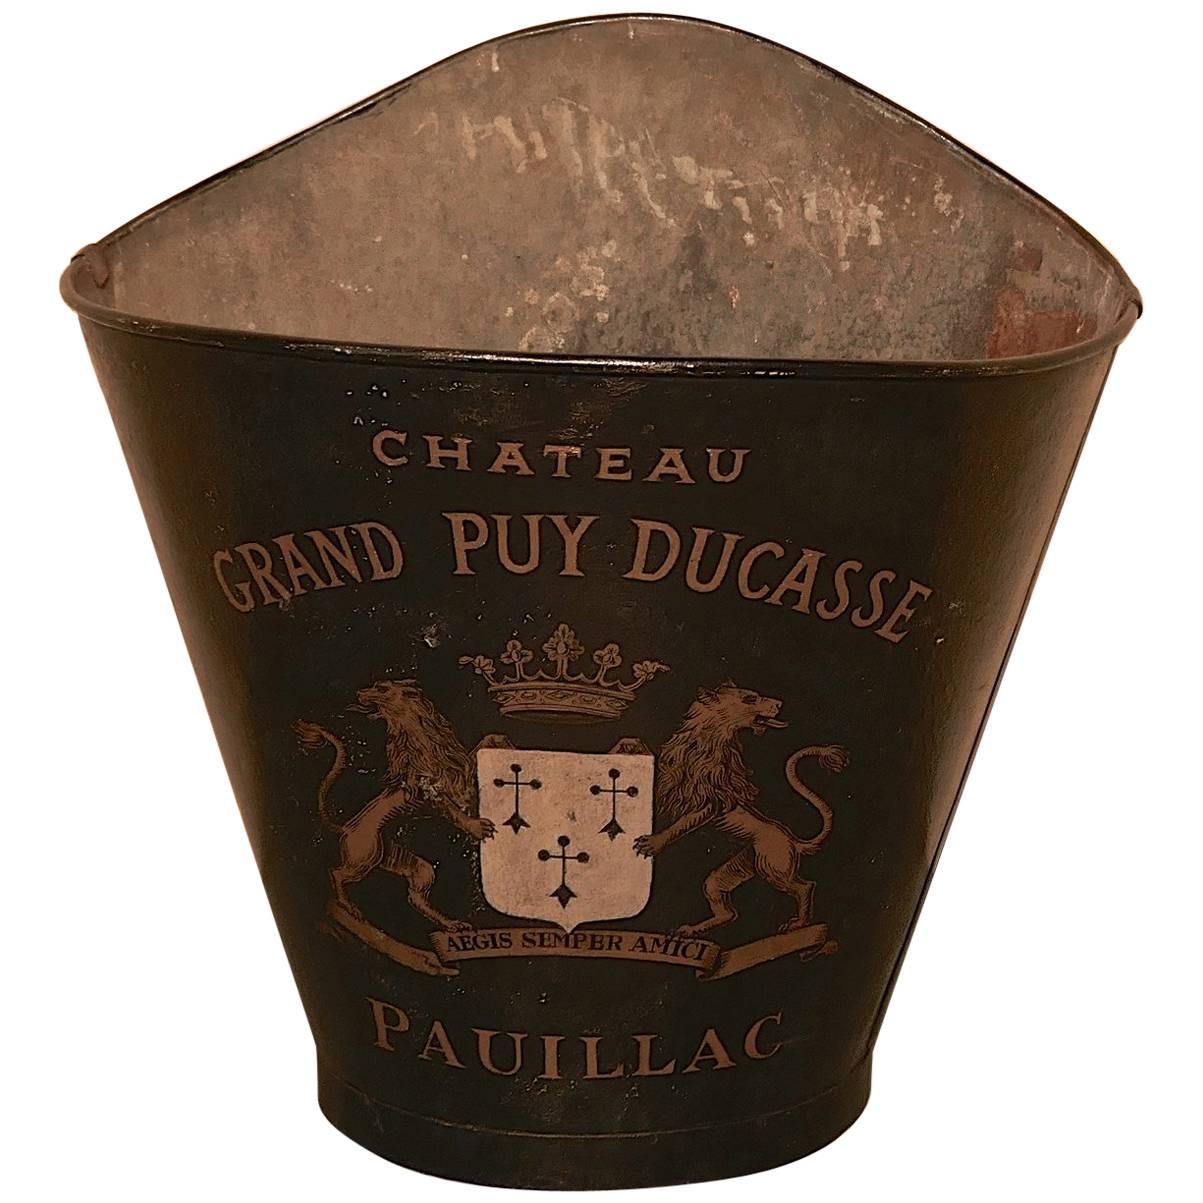 19th Century French Vineyard Grape Hod from Chateau Grand Puy Ducasse Pauillac